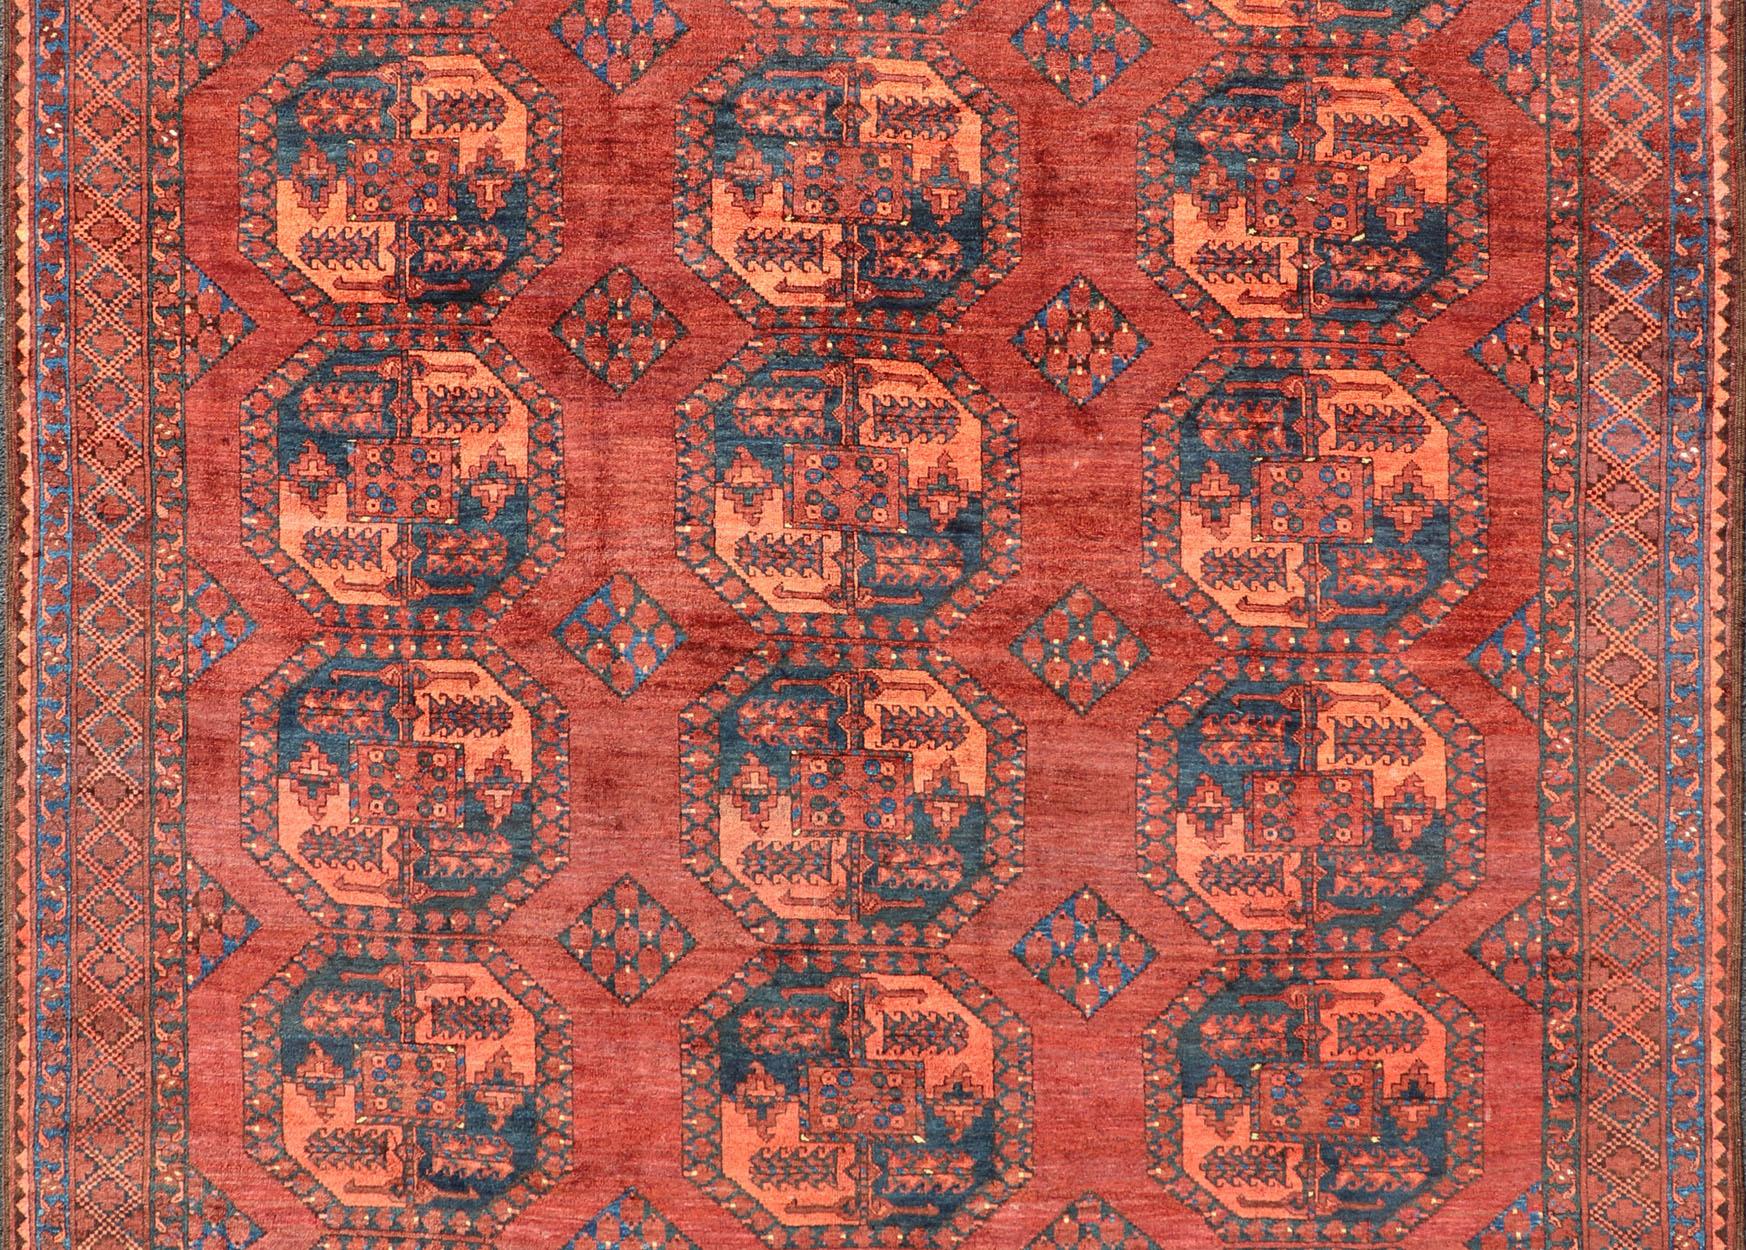 Tribal Hand-Knotted Turkomen Ersari Rug in Wool with Repeating Sub-Geometric Gul Design For Sale